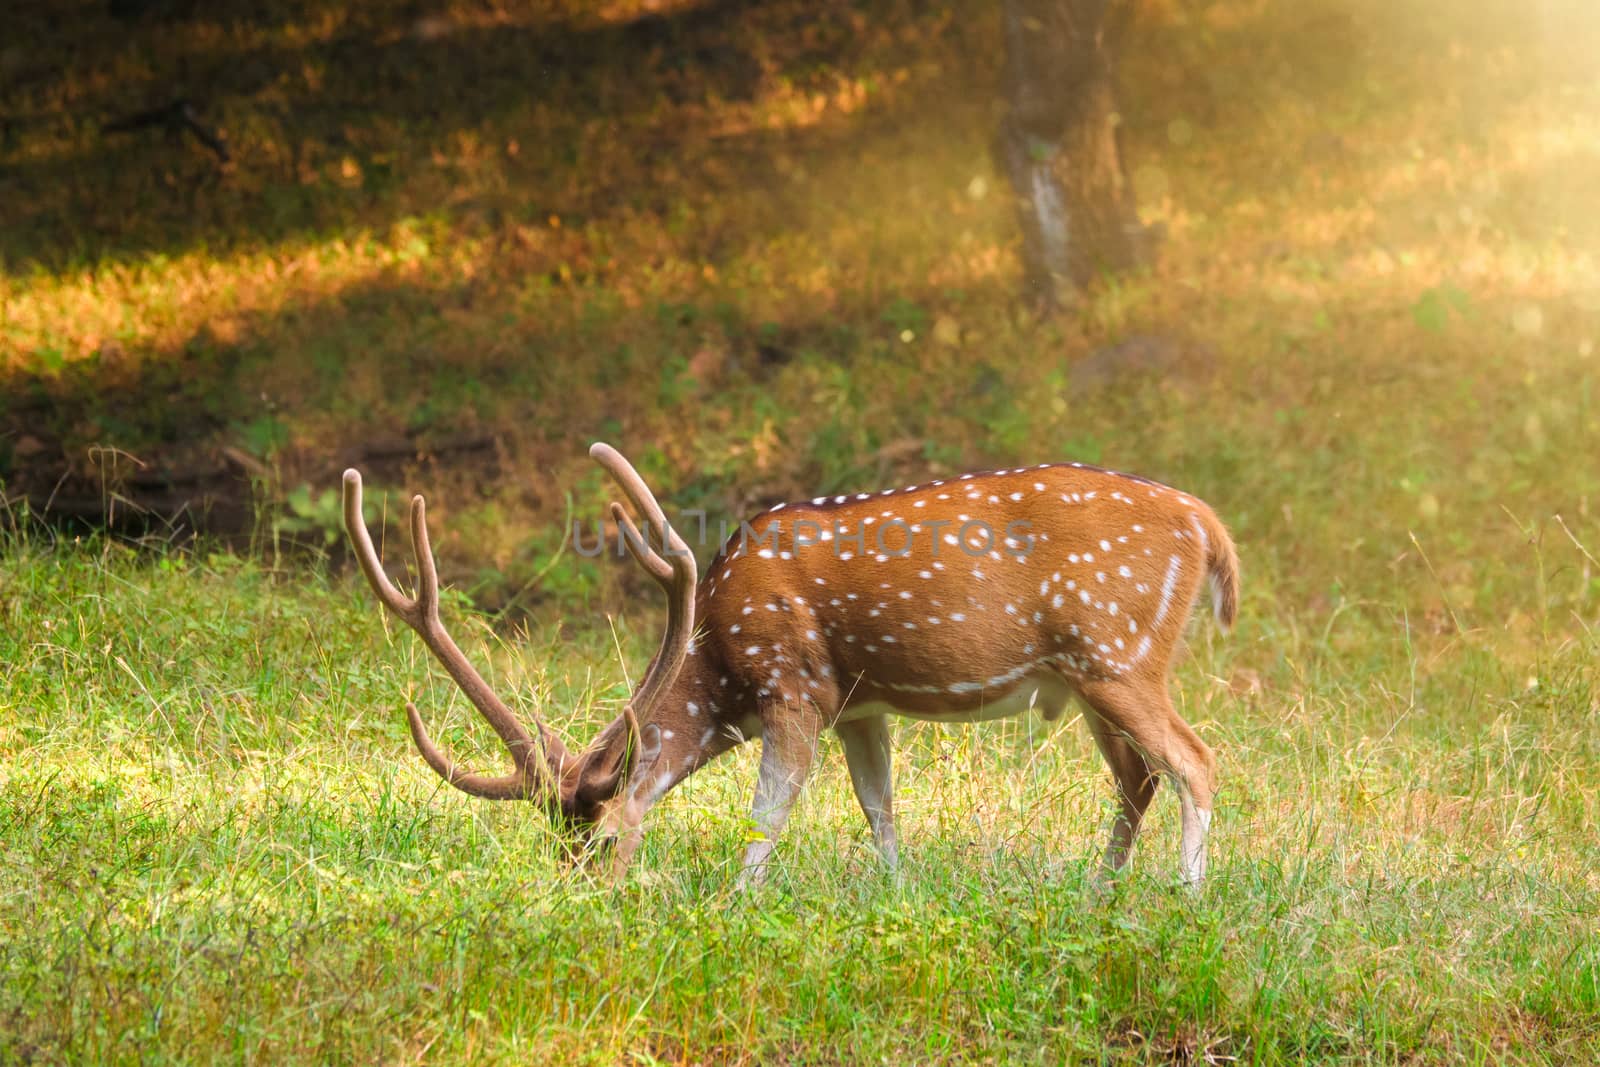 Beautiful male chital or spotted deer in Ranthambore National Park, Rajasthan, India by dimol